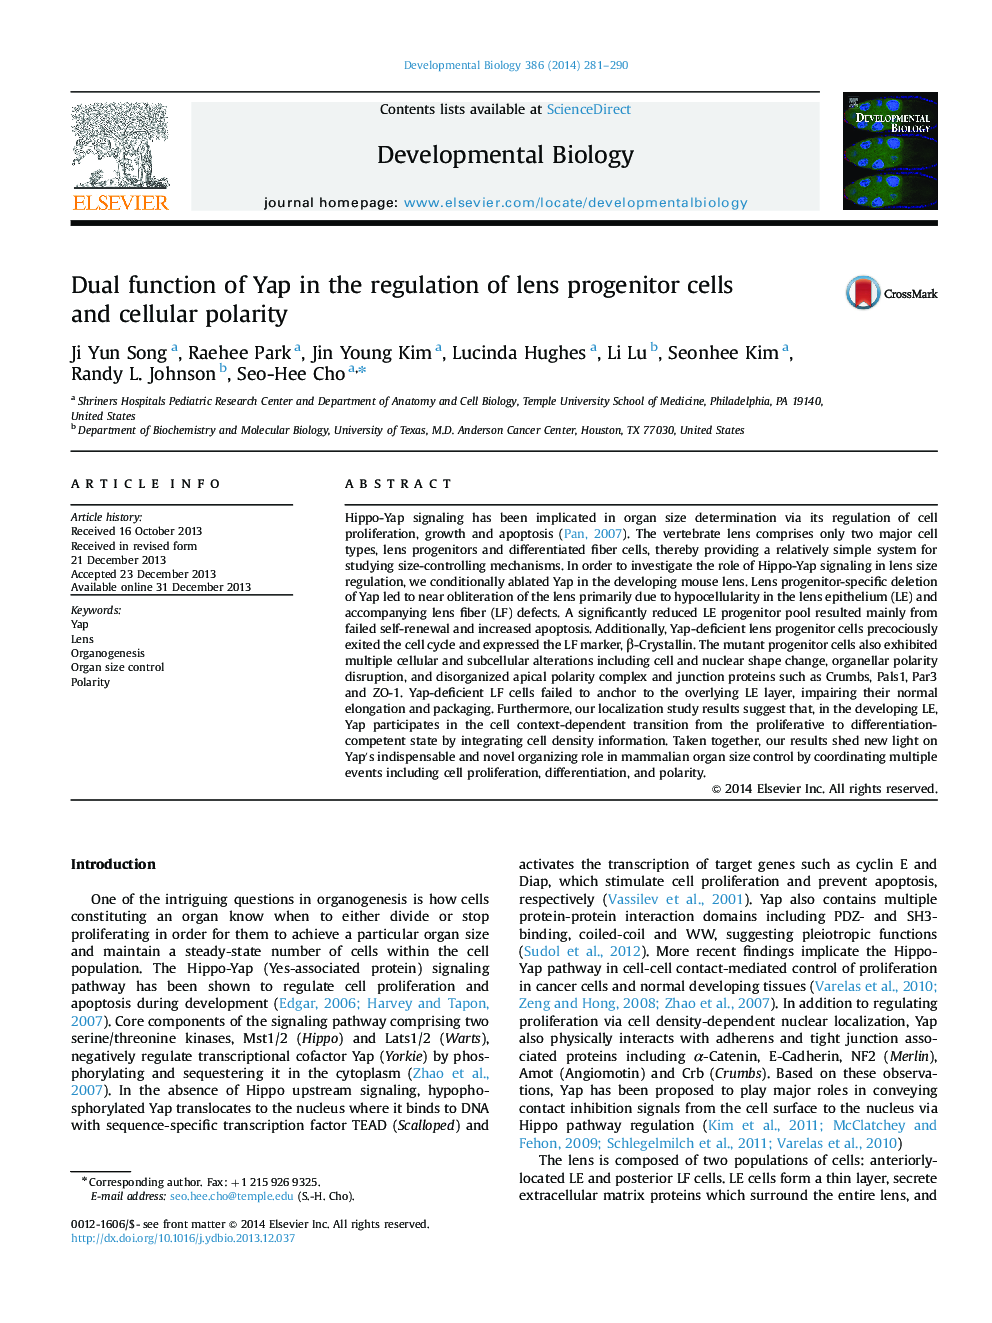 Dual function of Yap in the regulation of lens progenitor cells and cellular polarity